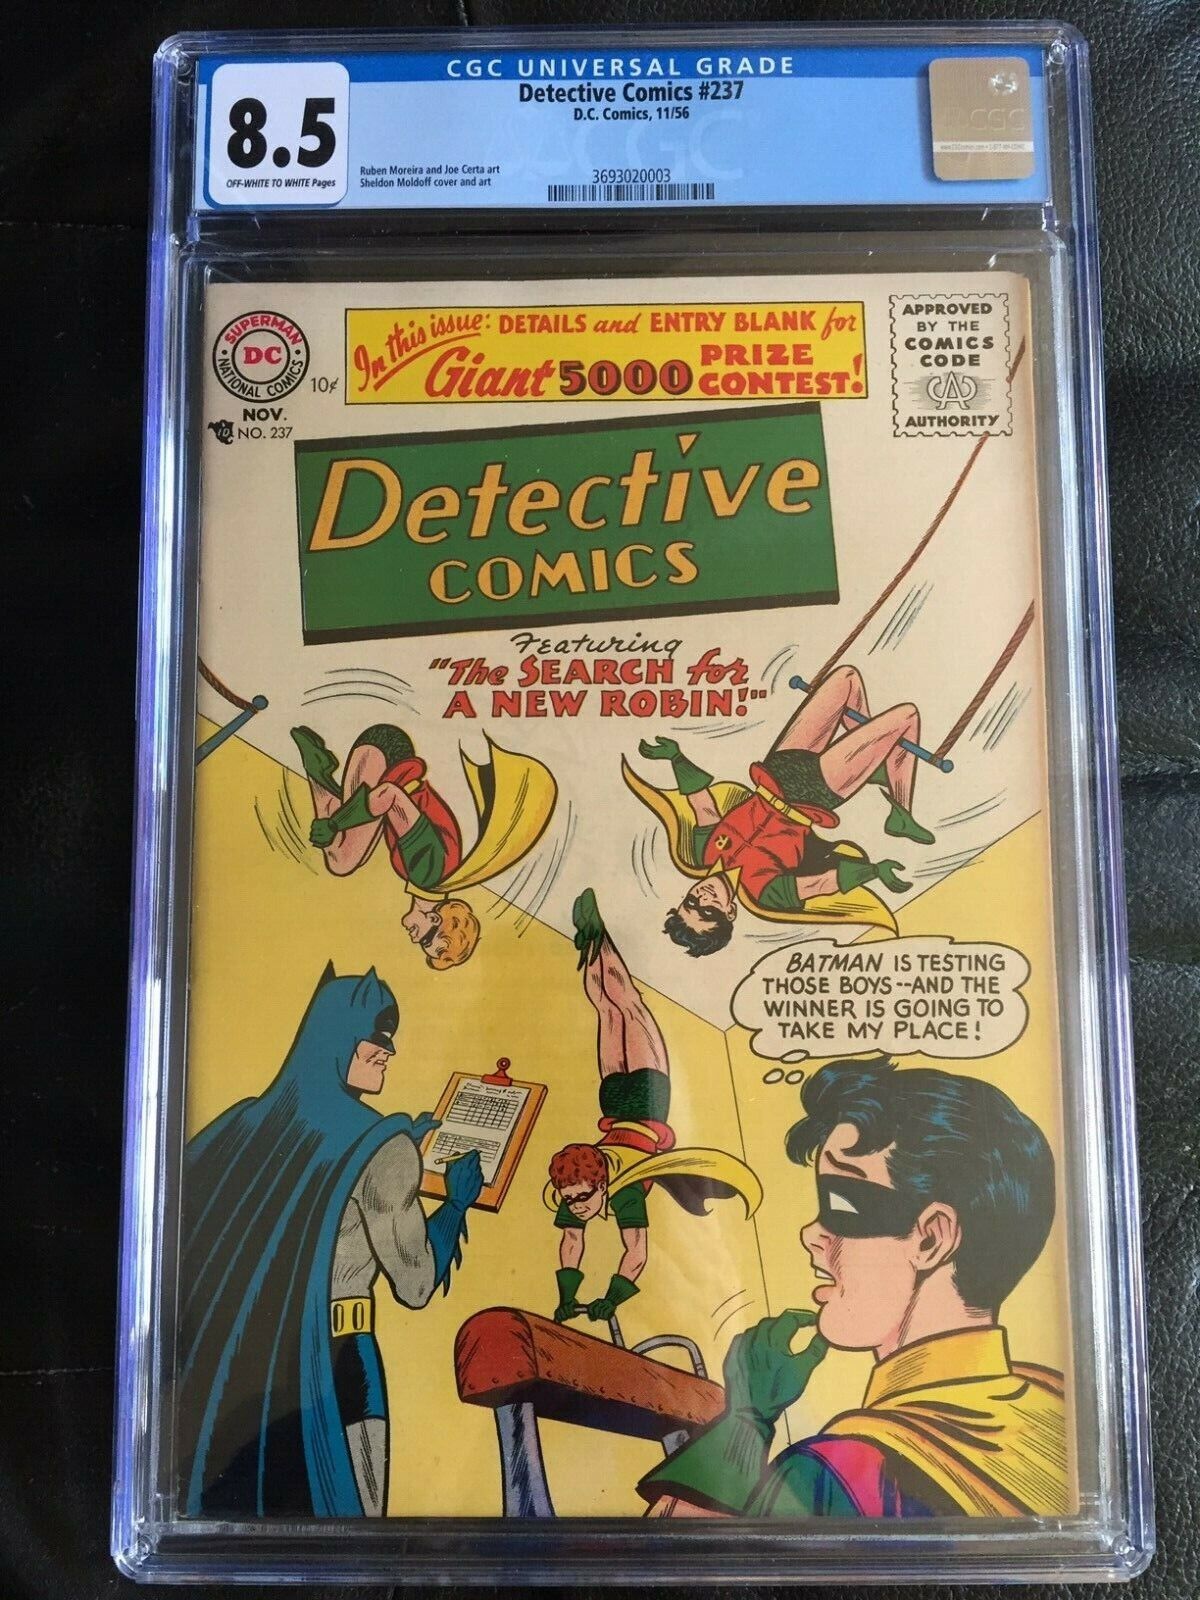 DETECTIVE COMICS #237 CGC VF+ 8.5; OW-W; The Search For a New Robin